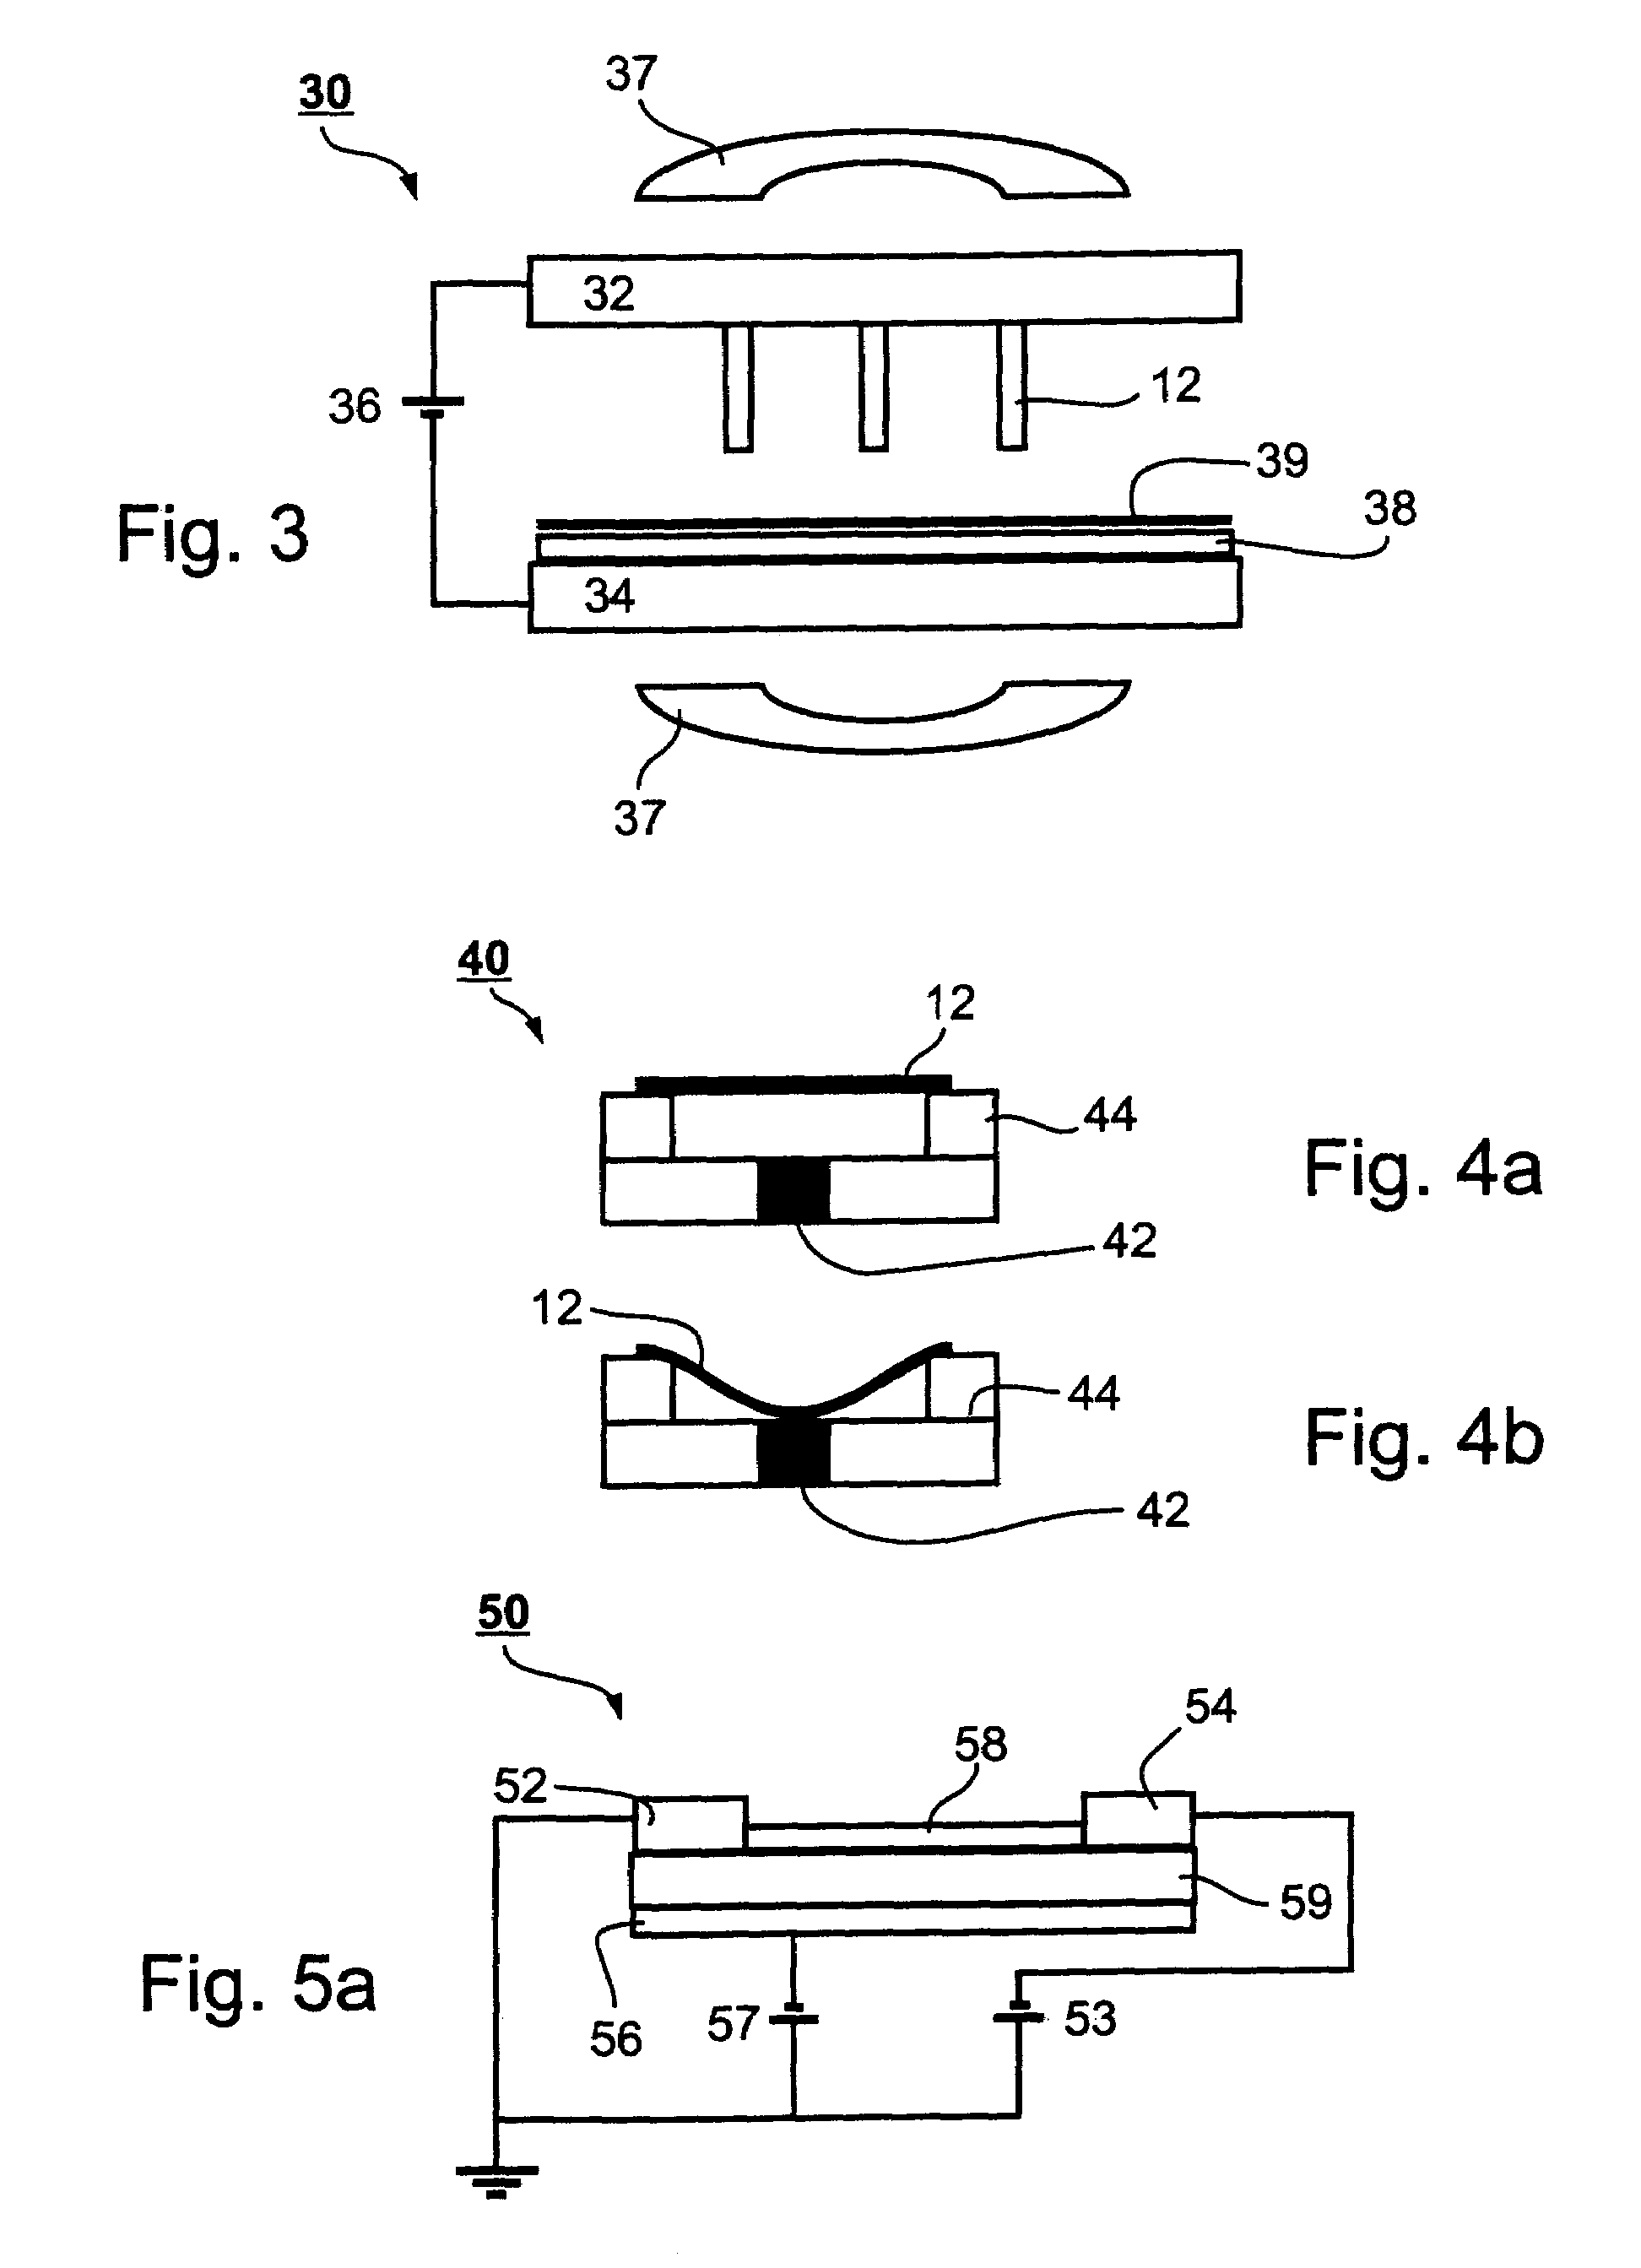 Peptide nanostructures and methods of generating and using the same